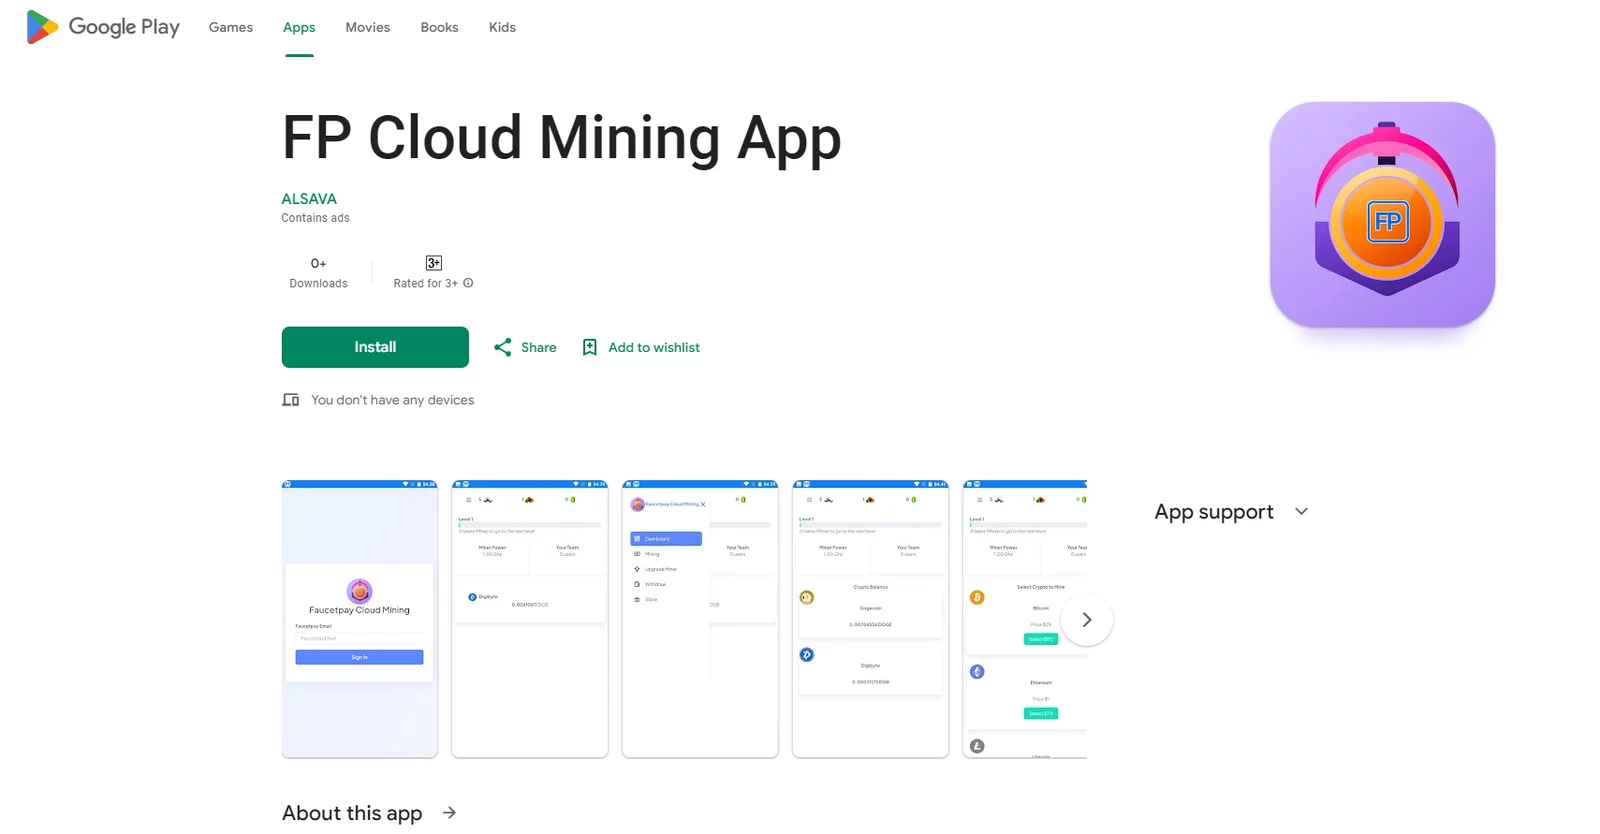 A Comprehensive Review of the FP Cloud Mining App on Play Store